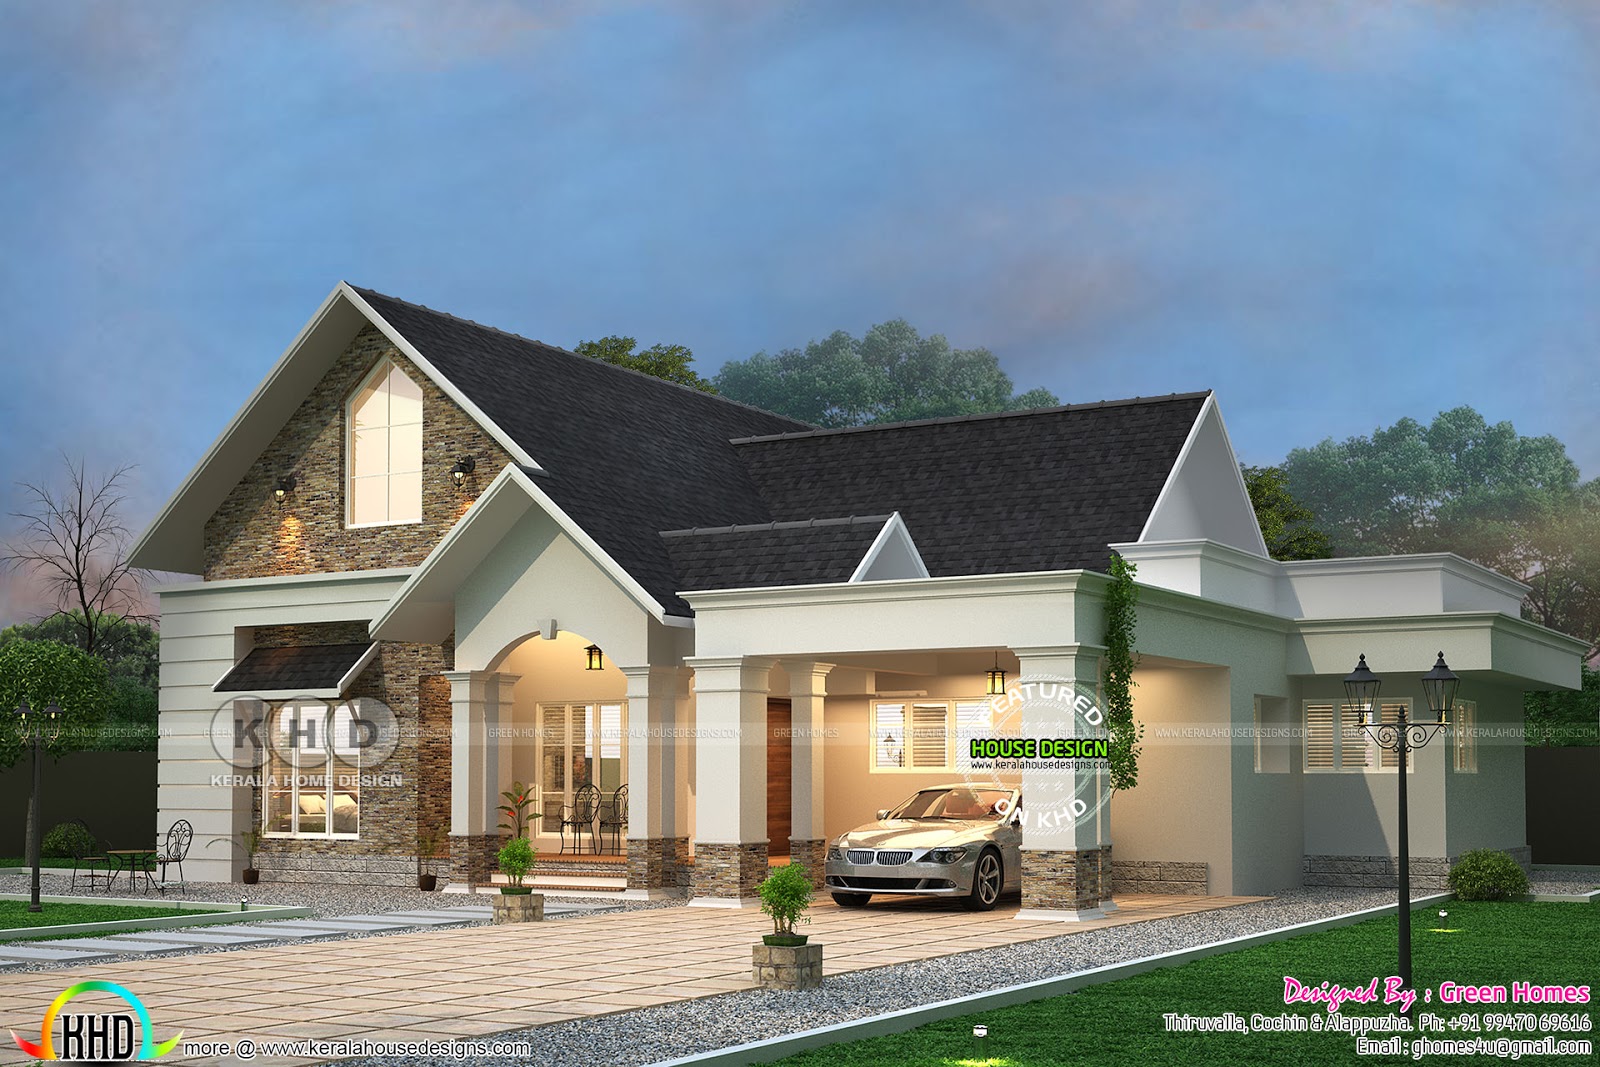 3 Bedroom sloped roof  bungalow  architecture Kerala home  